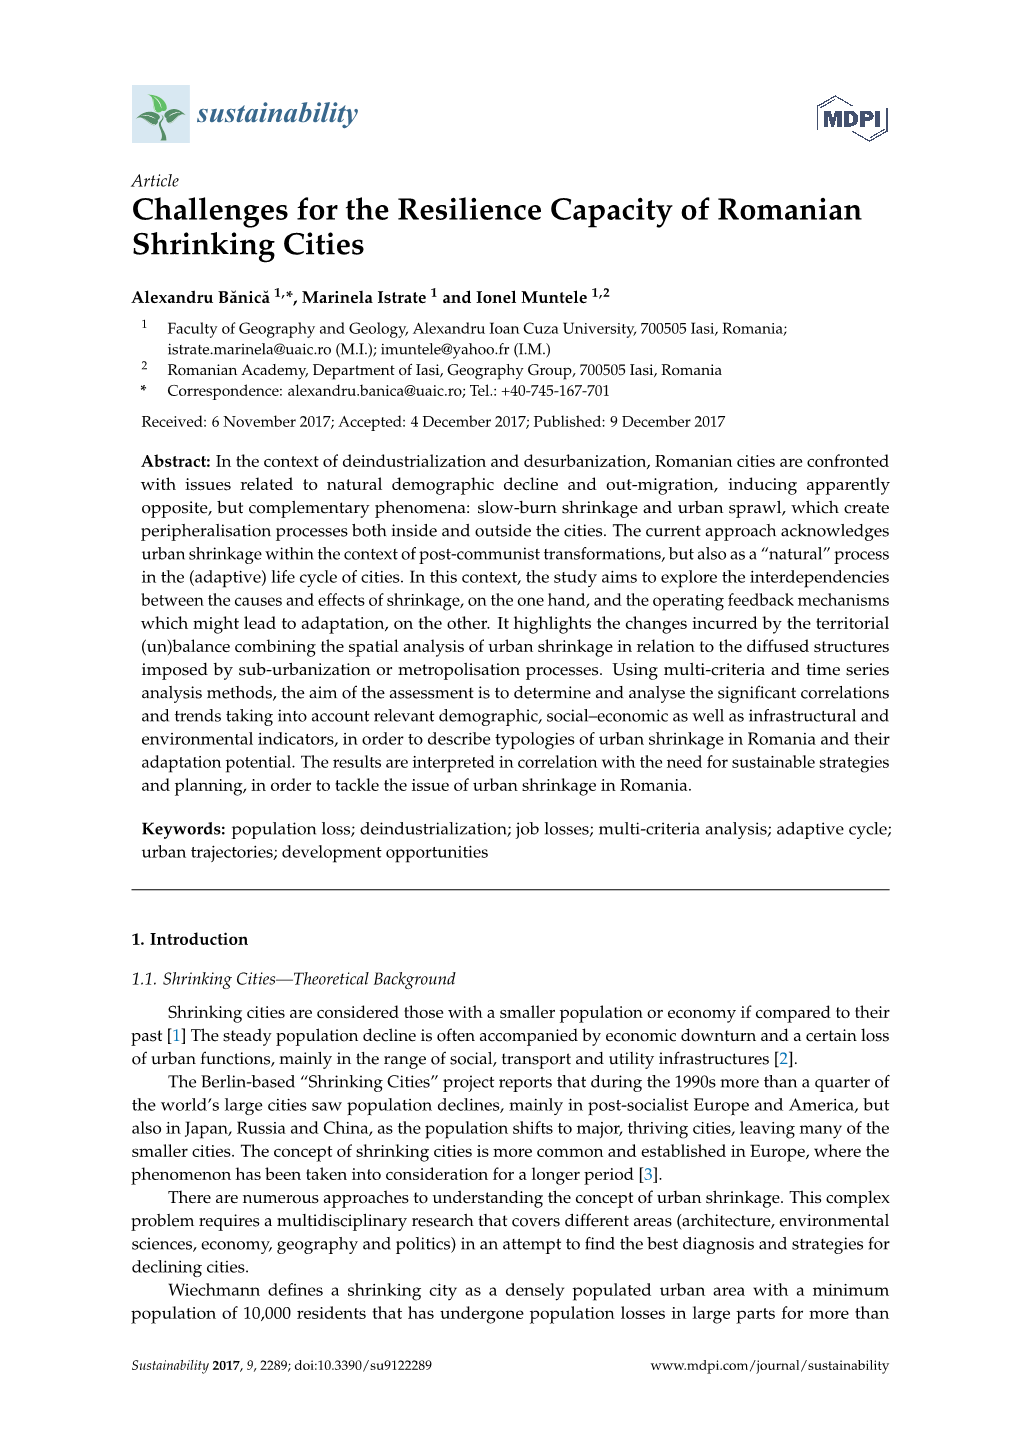 Challenges for the Resilience Capacity of Romanian Shrinking Cities